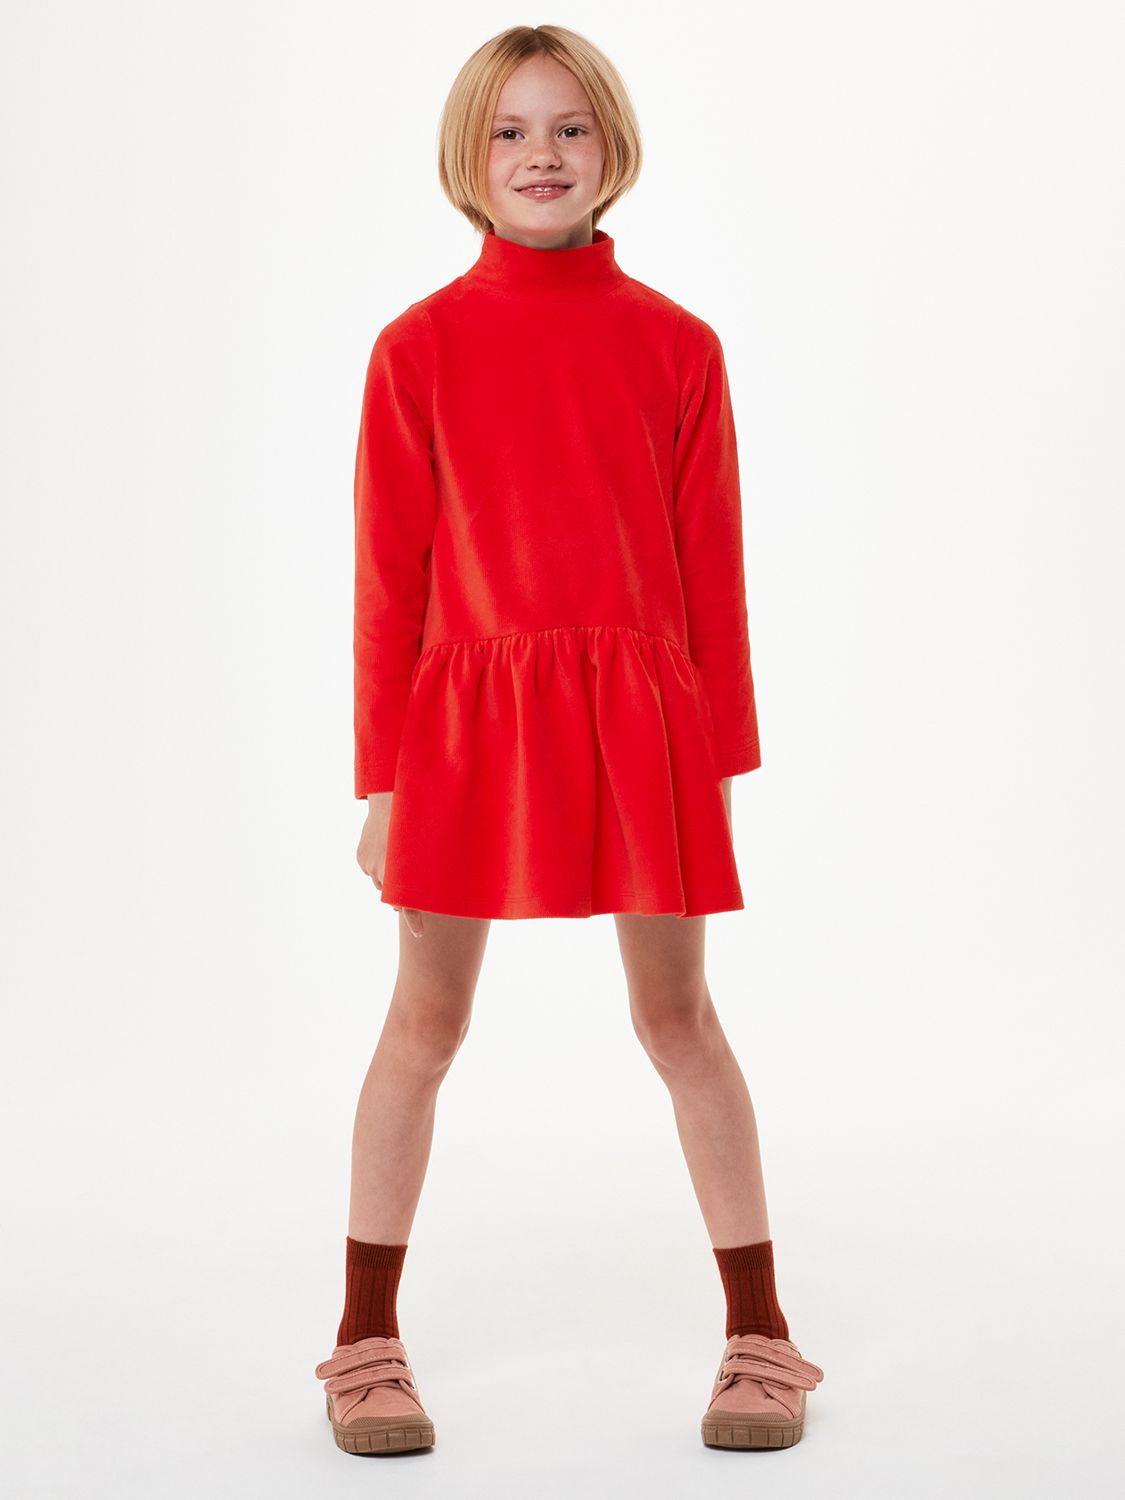 Whistles Kids' Corduroy Funnel Neck Jersey Dress, Red, 4-5 years